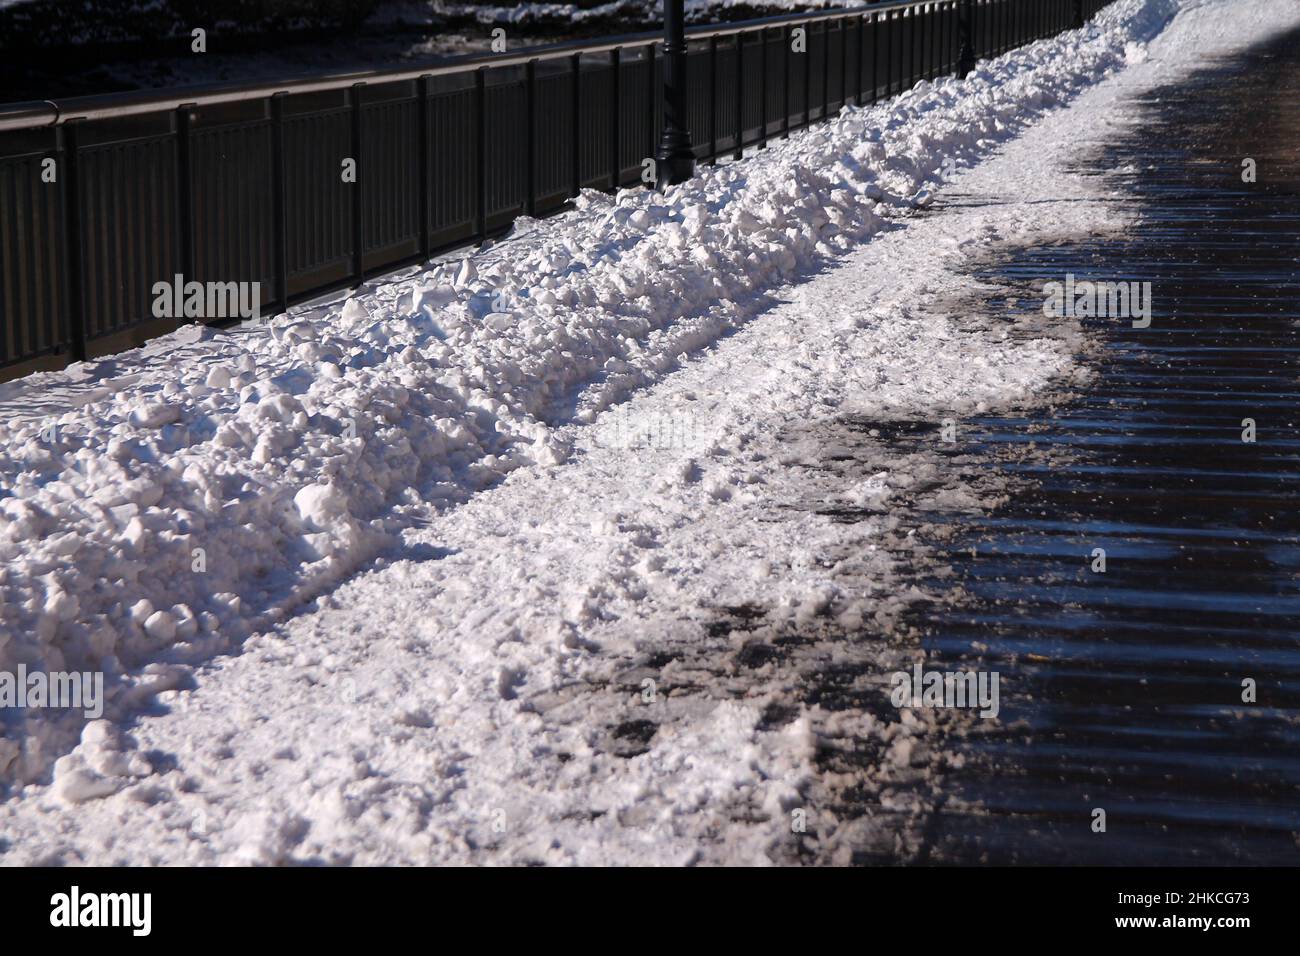 The fresh snow on the wooden walkaway in a sunny winter and cold day Stock Photo